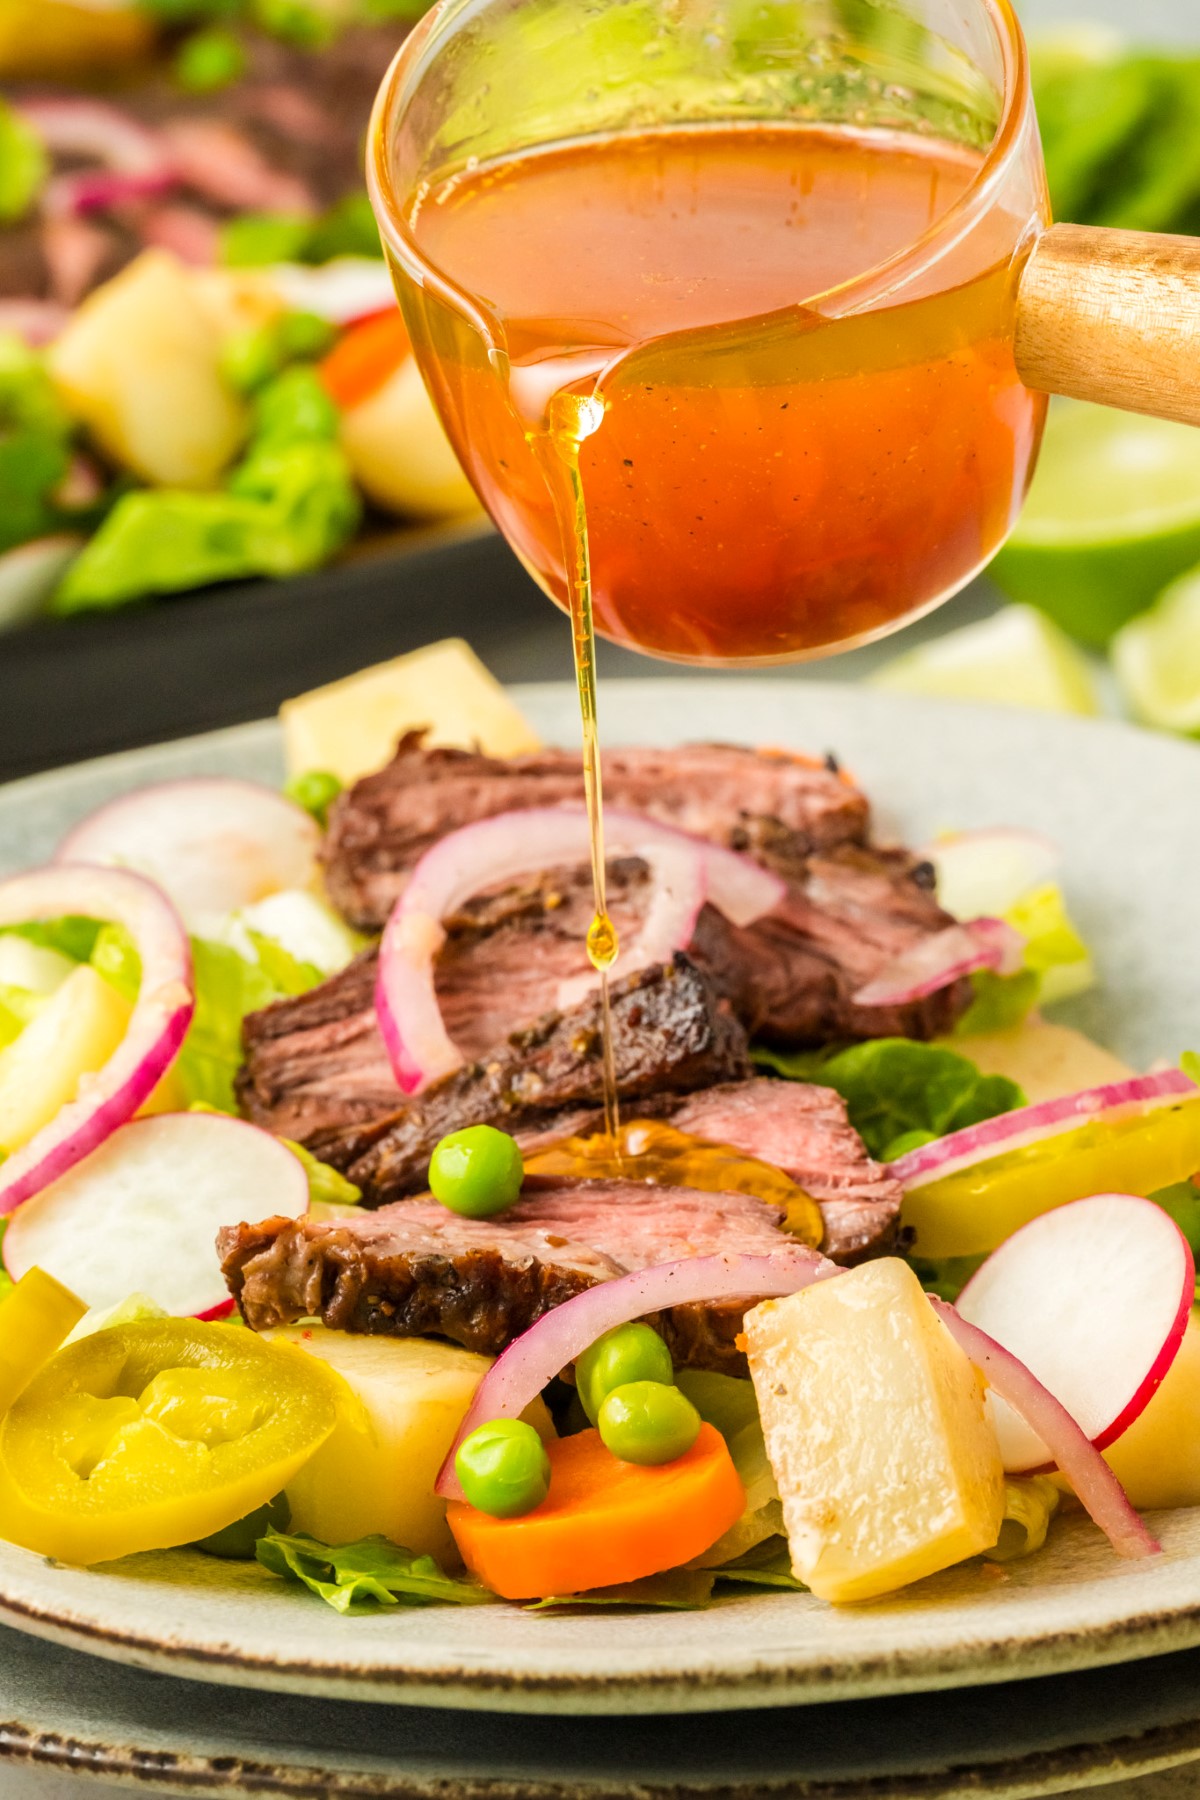 Drizzliing the dressing over the flank steak salad.